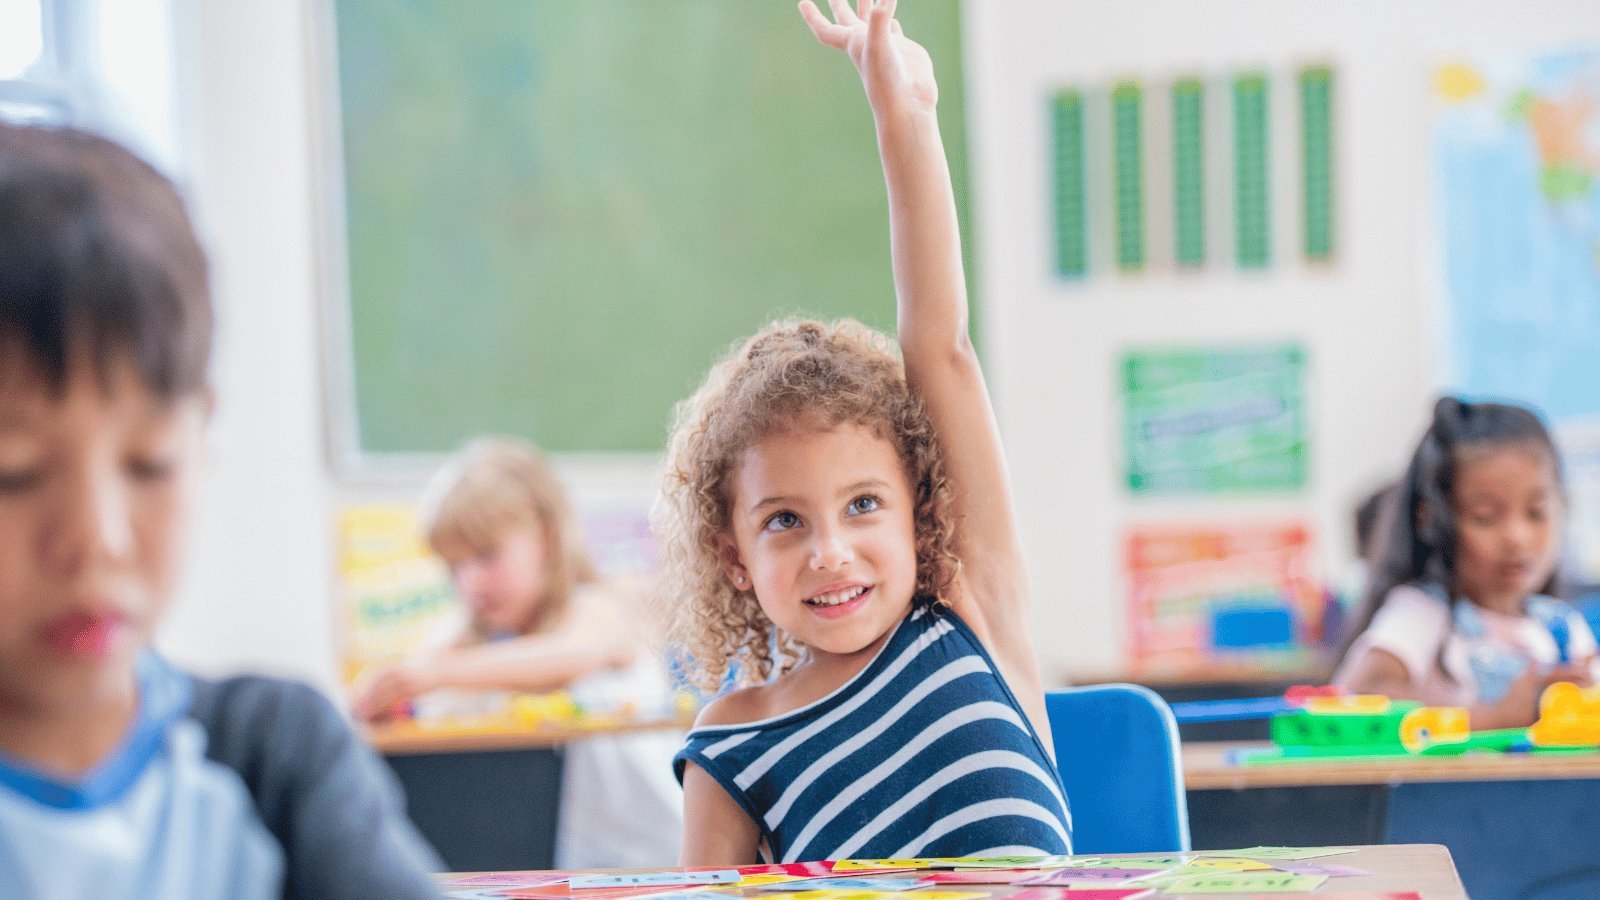 How to Use Open-Ended Questions with Preschoolers